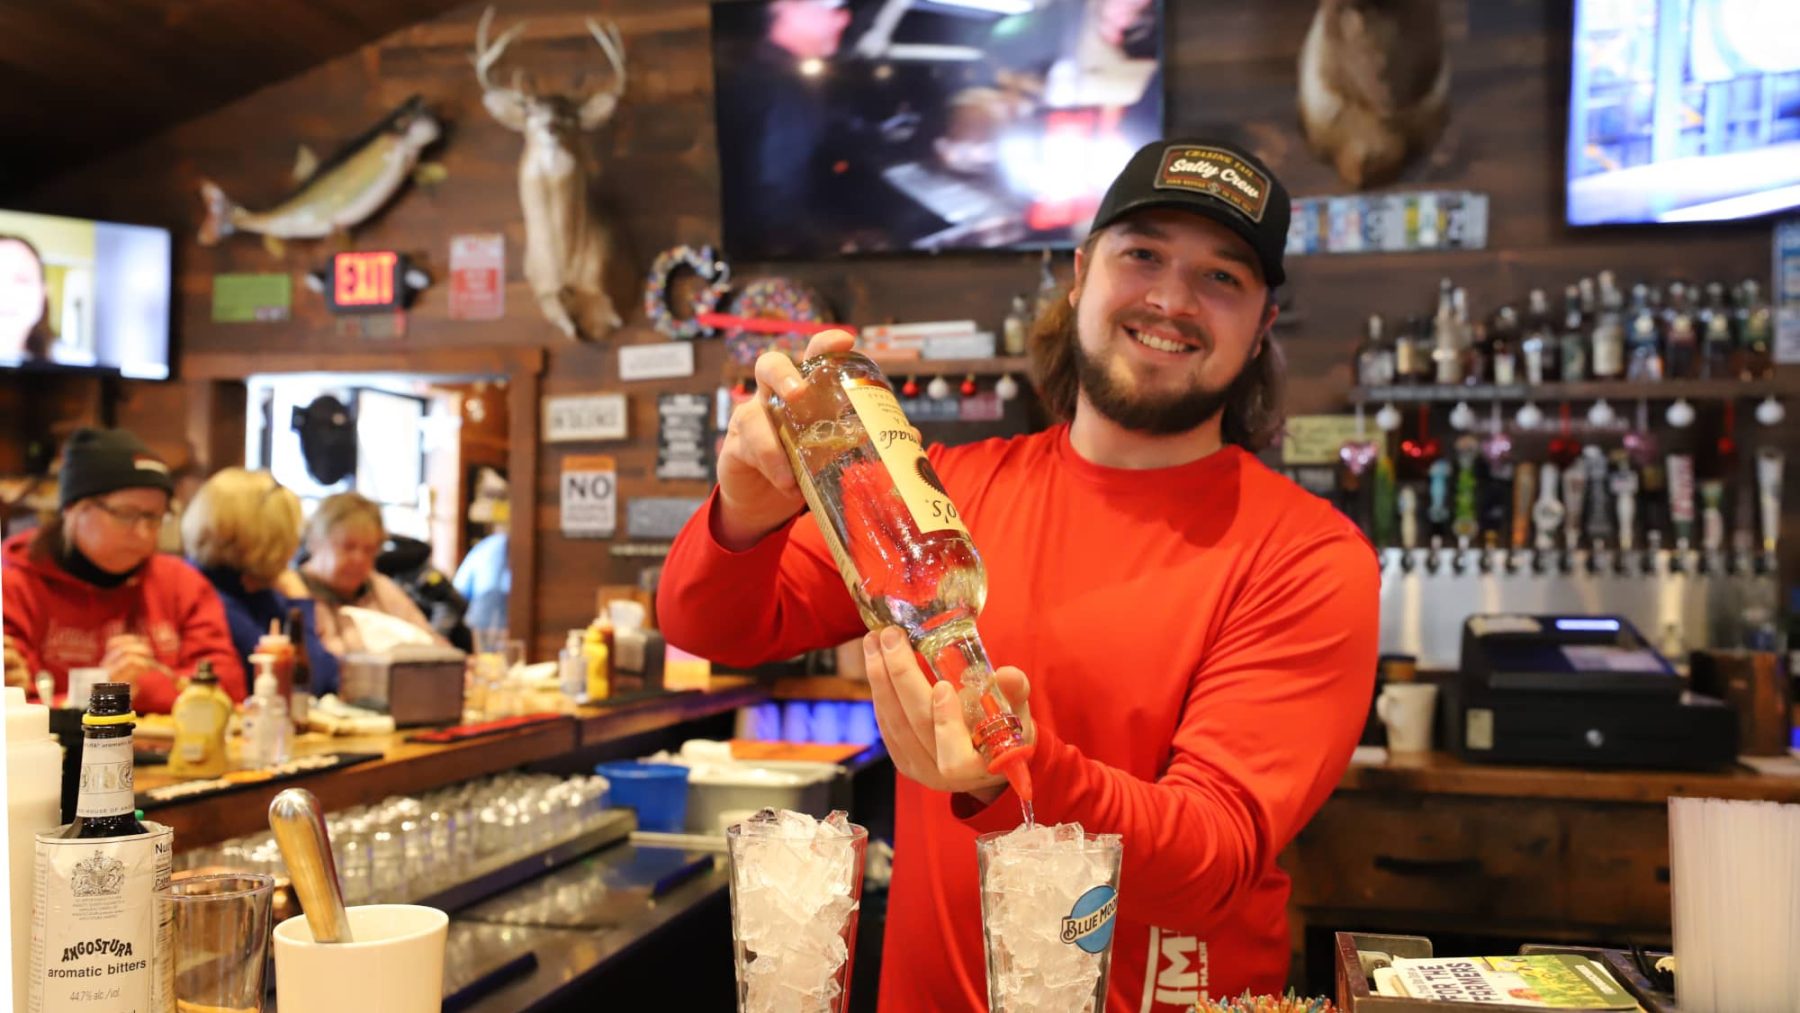 Article: Catch the big game at these iconic Wisconsin sports bars | Bartender at Gooch's 2 Bar & Grill Bouder Junction Wisconsin